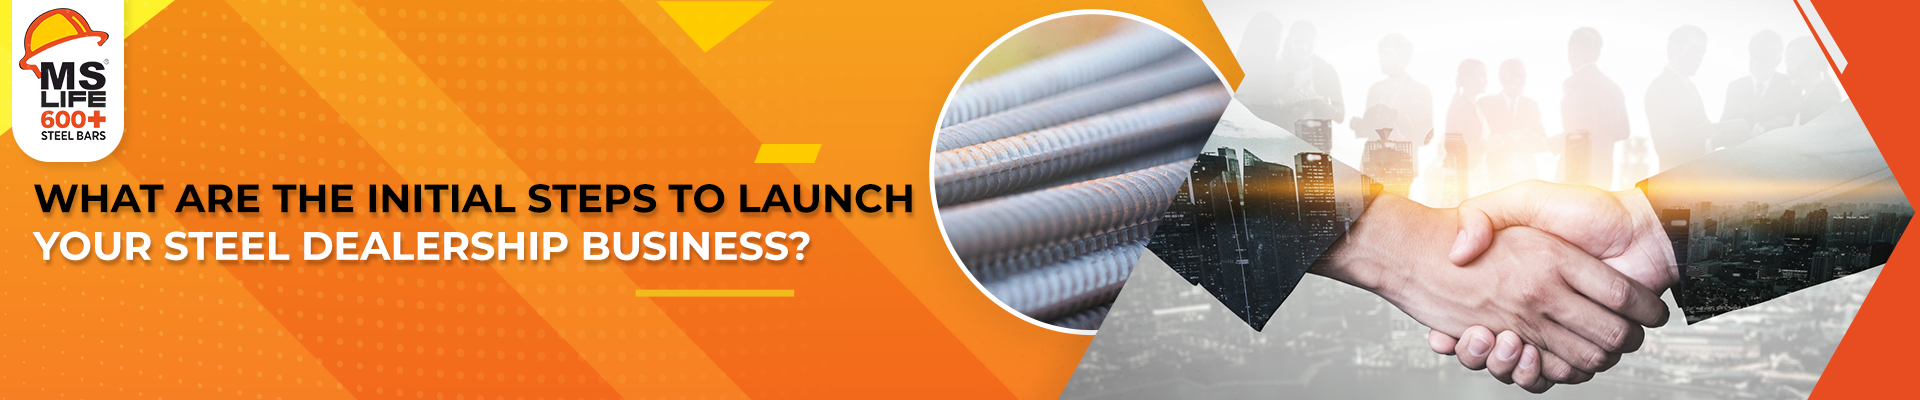 What Are the Initial Steps to Launch Your Steel Dealership Business?